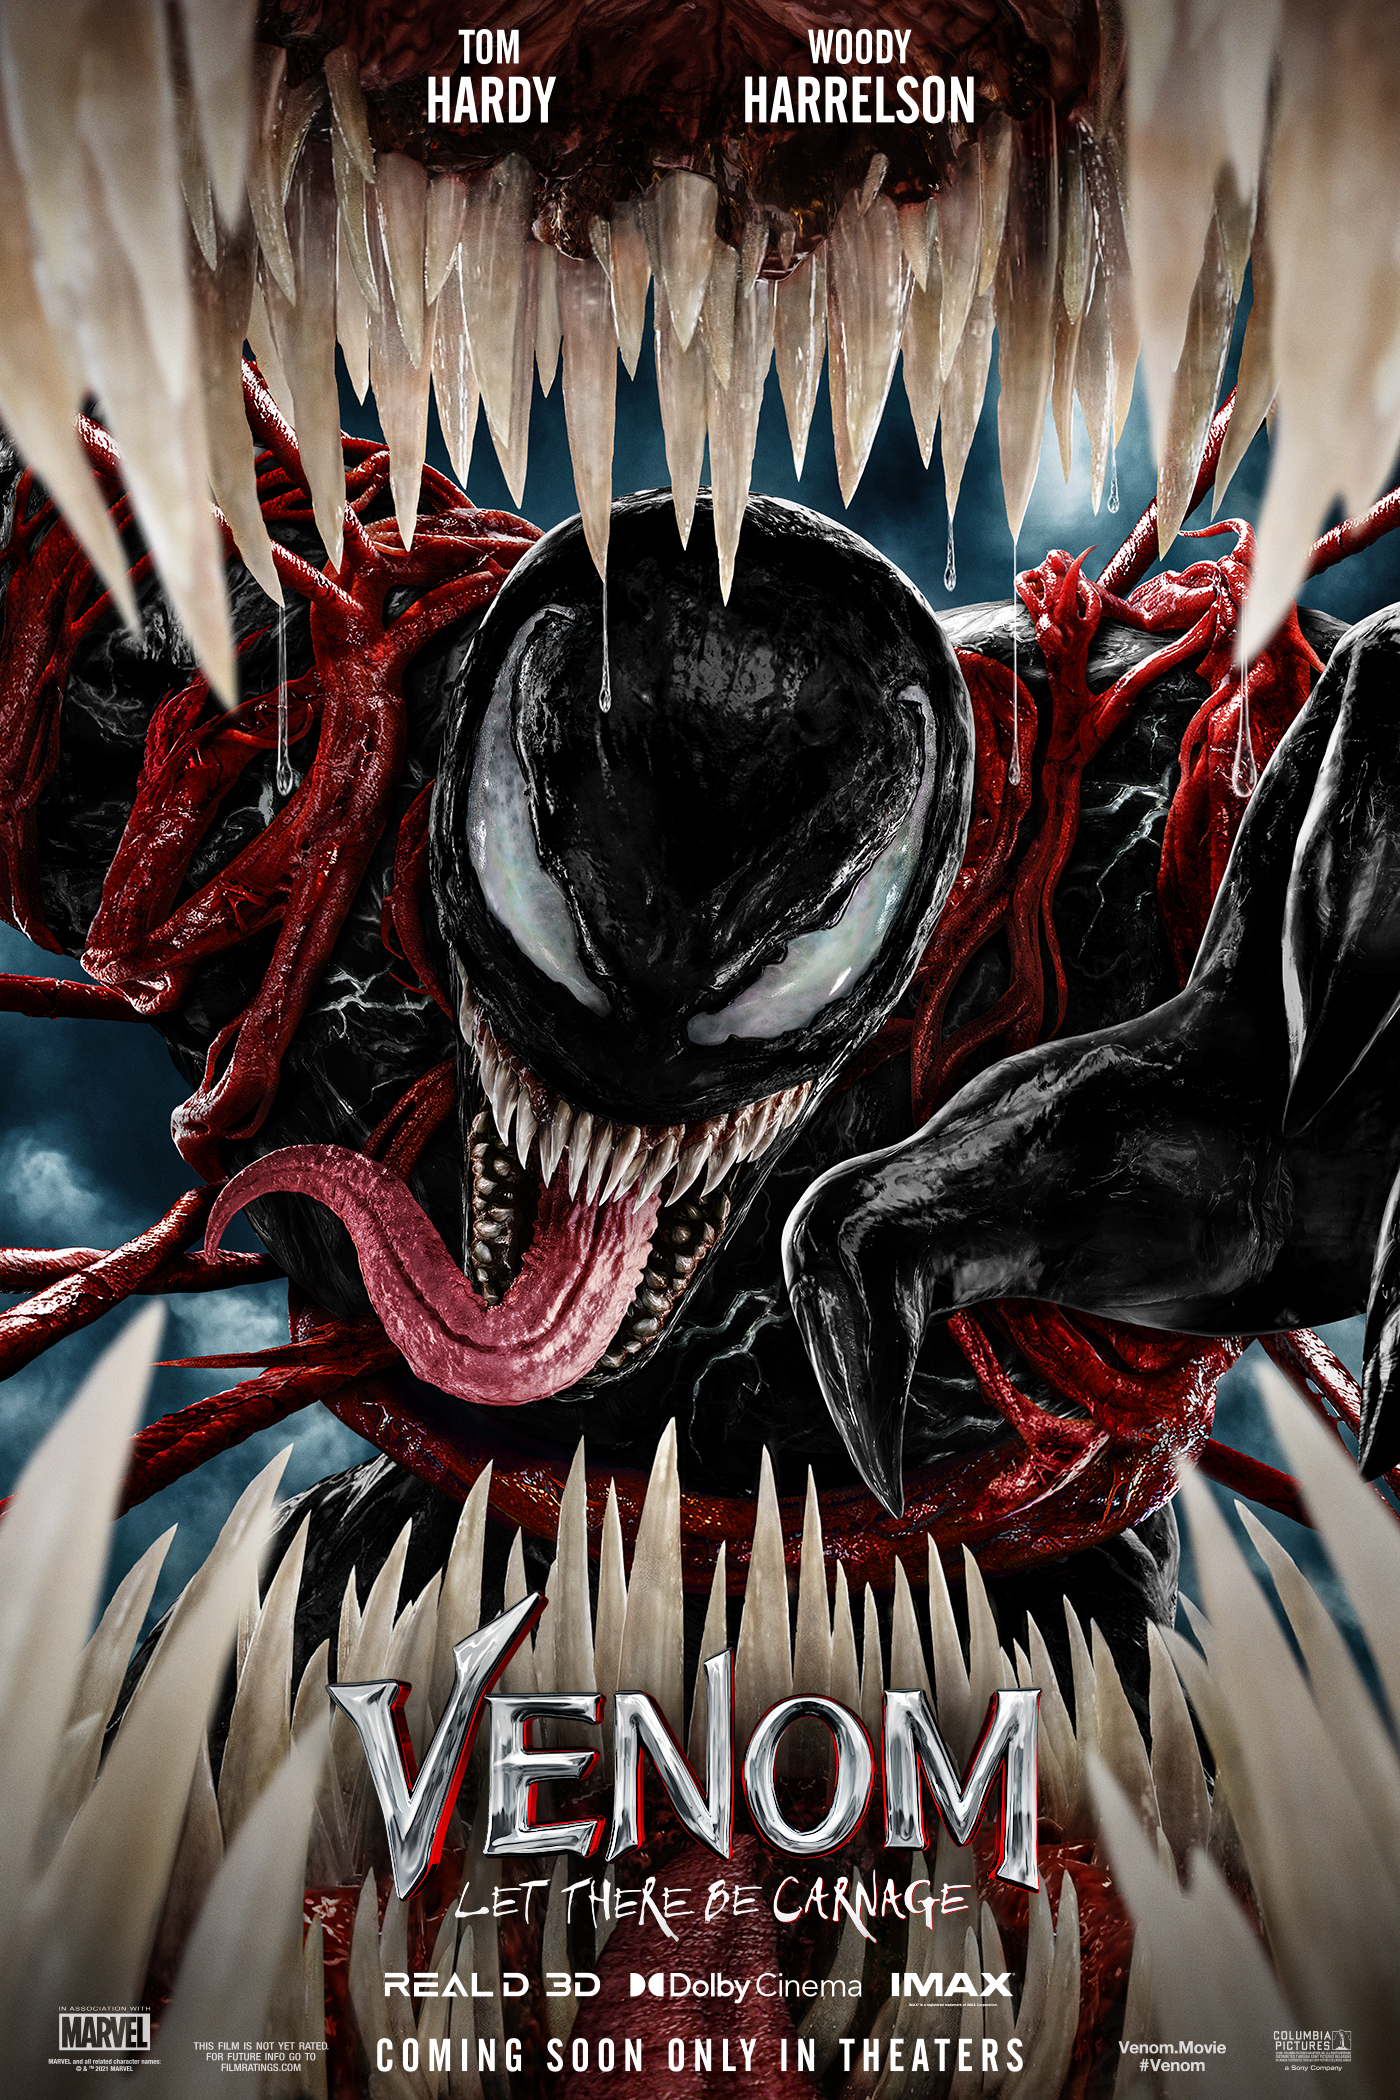 Venom Let There Be Carnage Gets Its First Poster   IGN